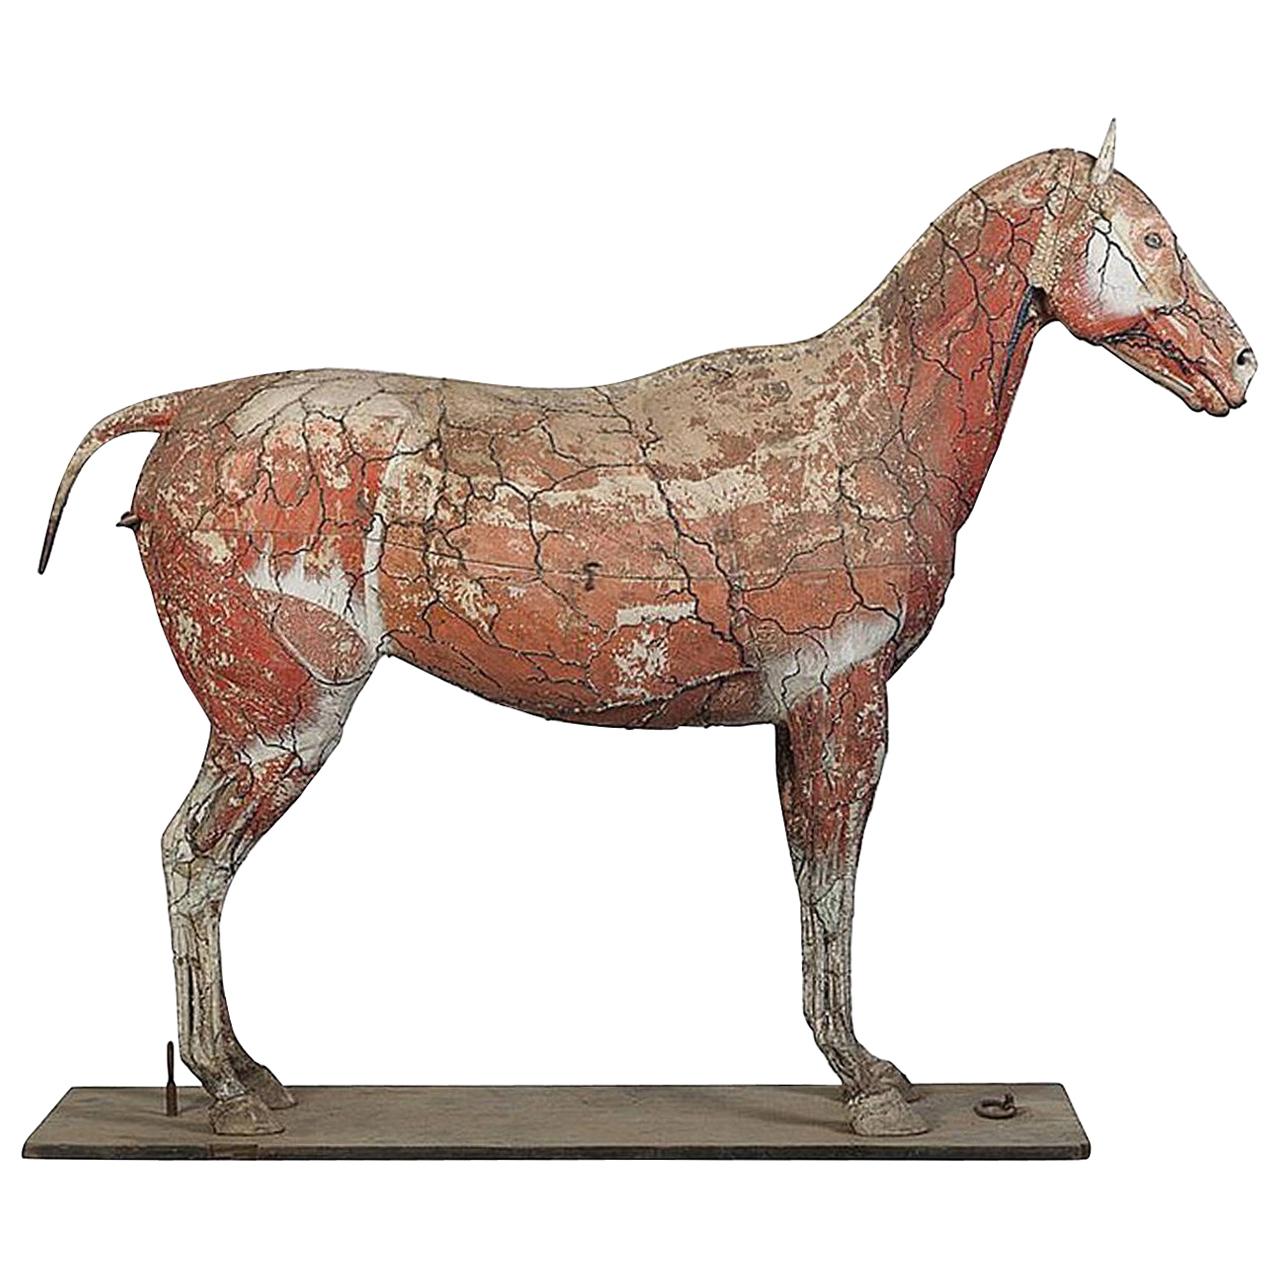 Dr. Auzoux’s Historic Full Sized Horse Model For Sale